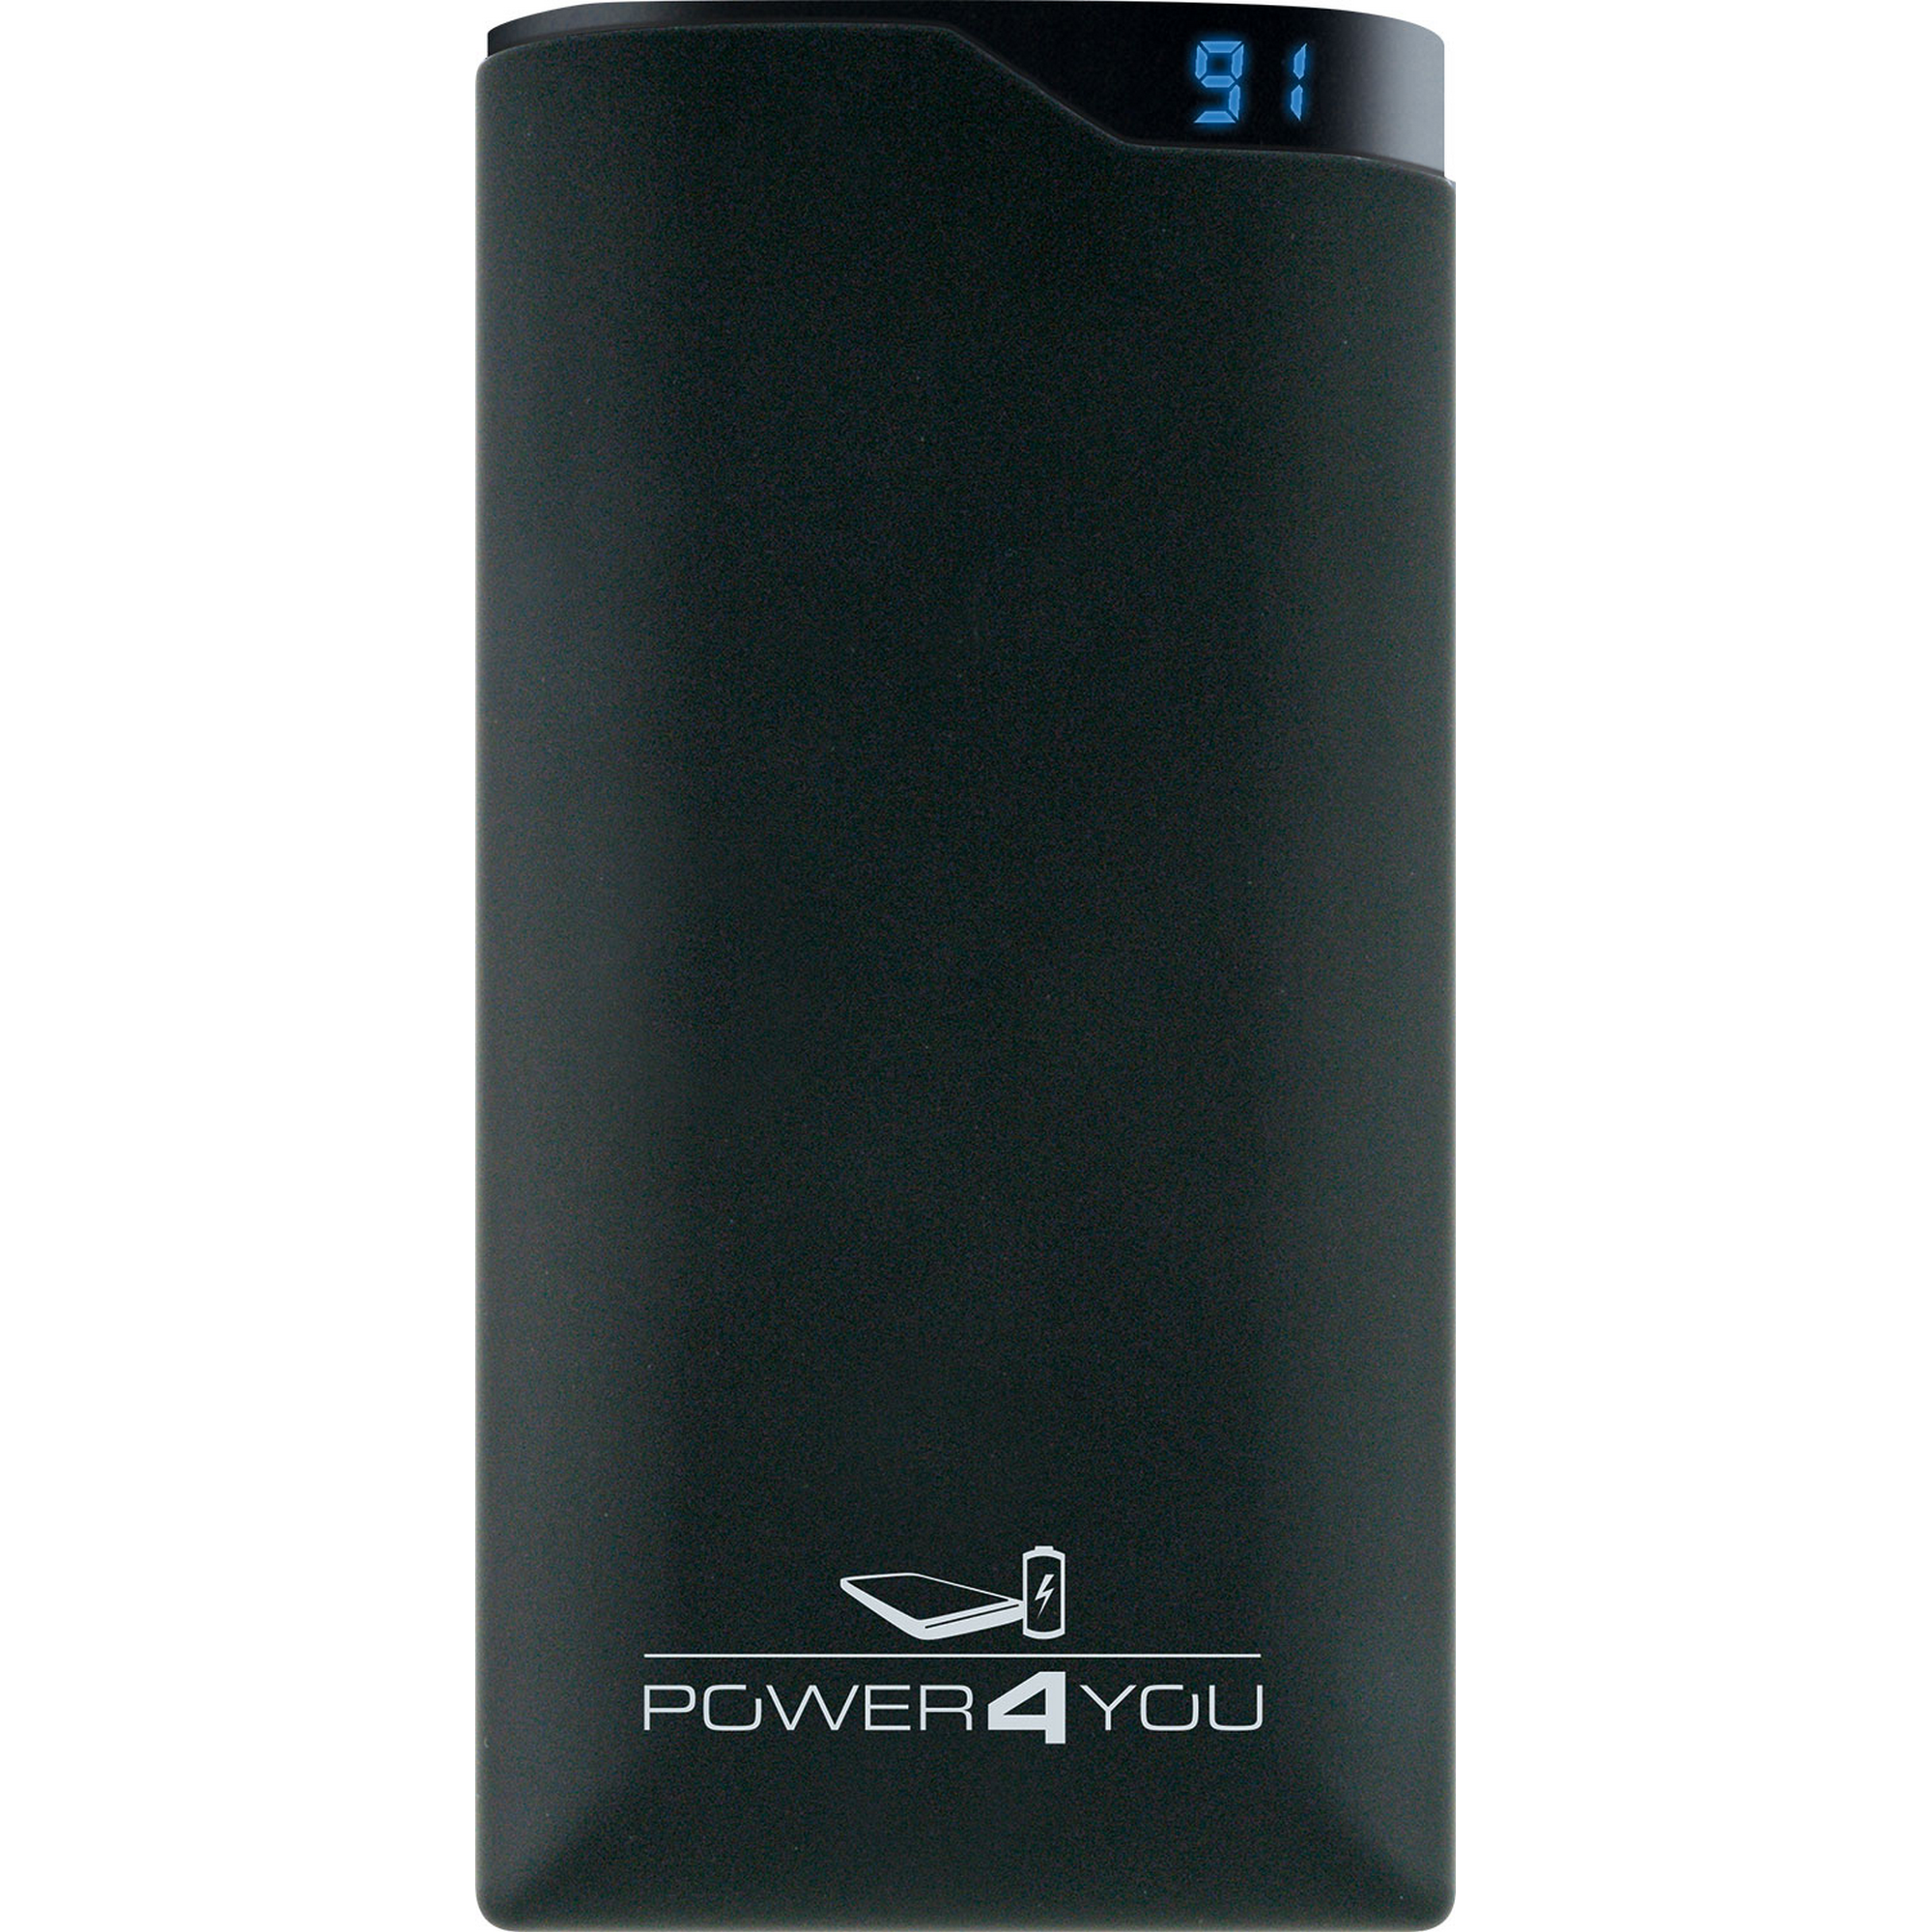 Powerbank 10000 mAh 'Flach' + product picture